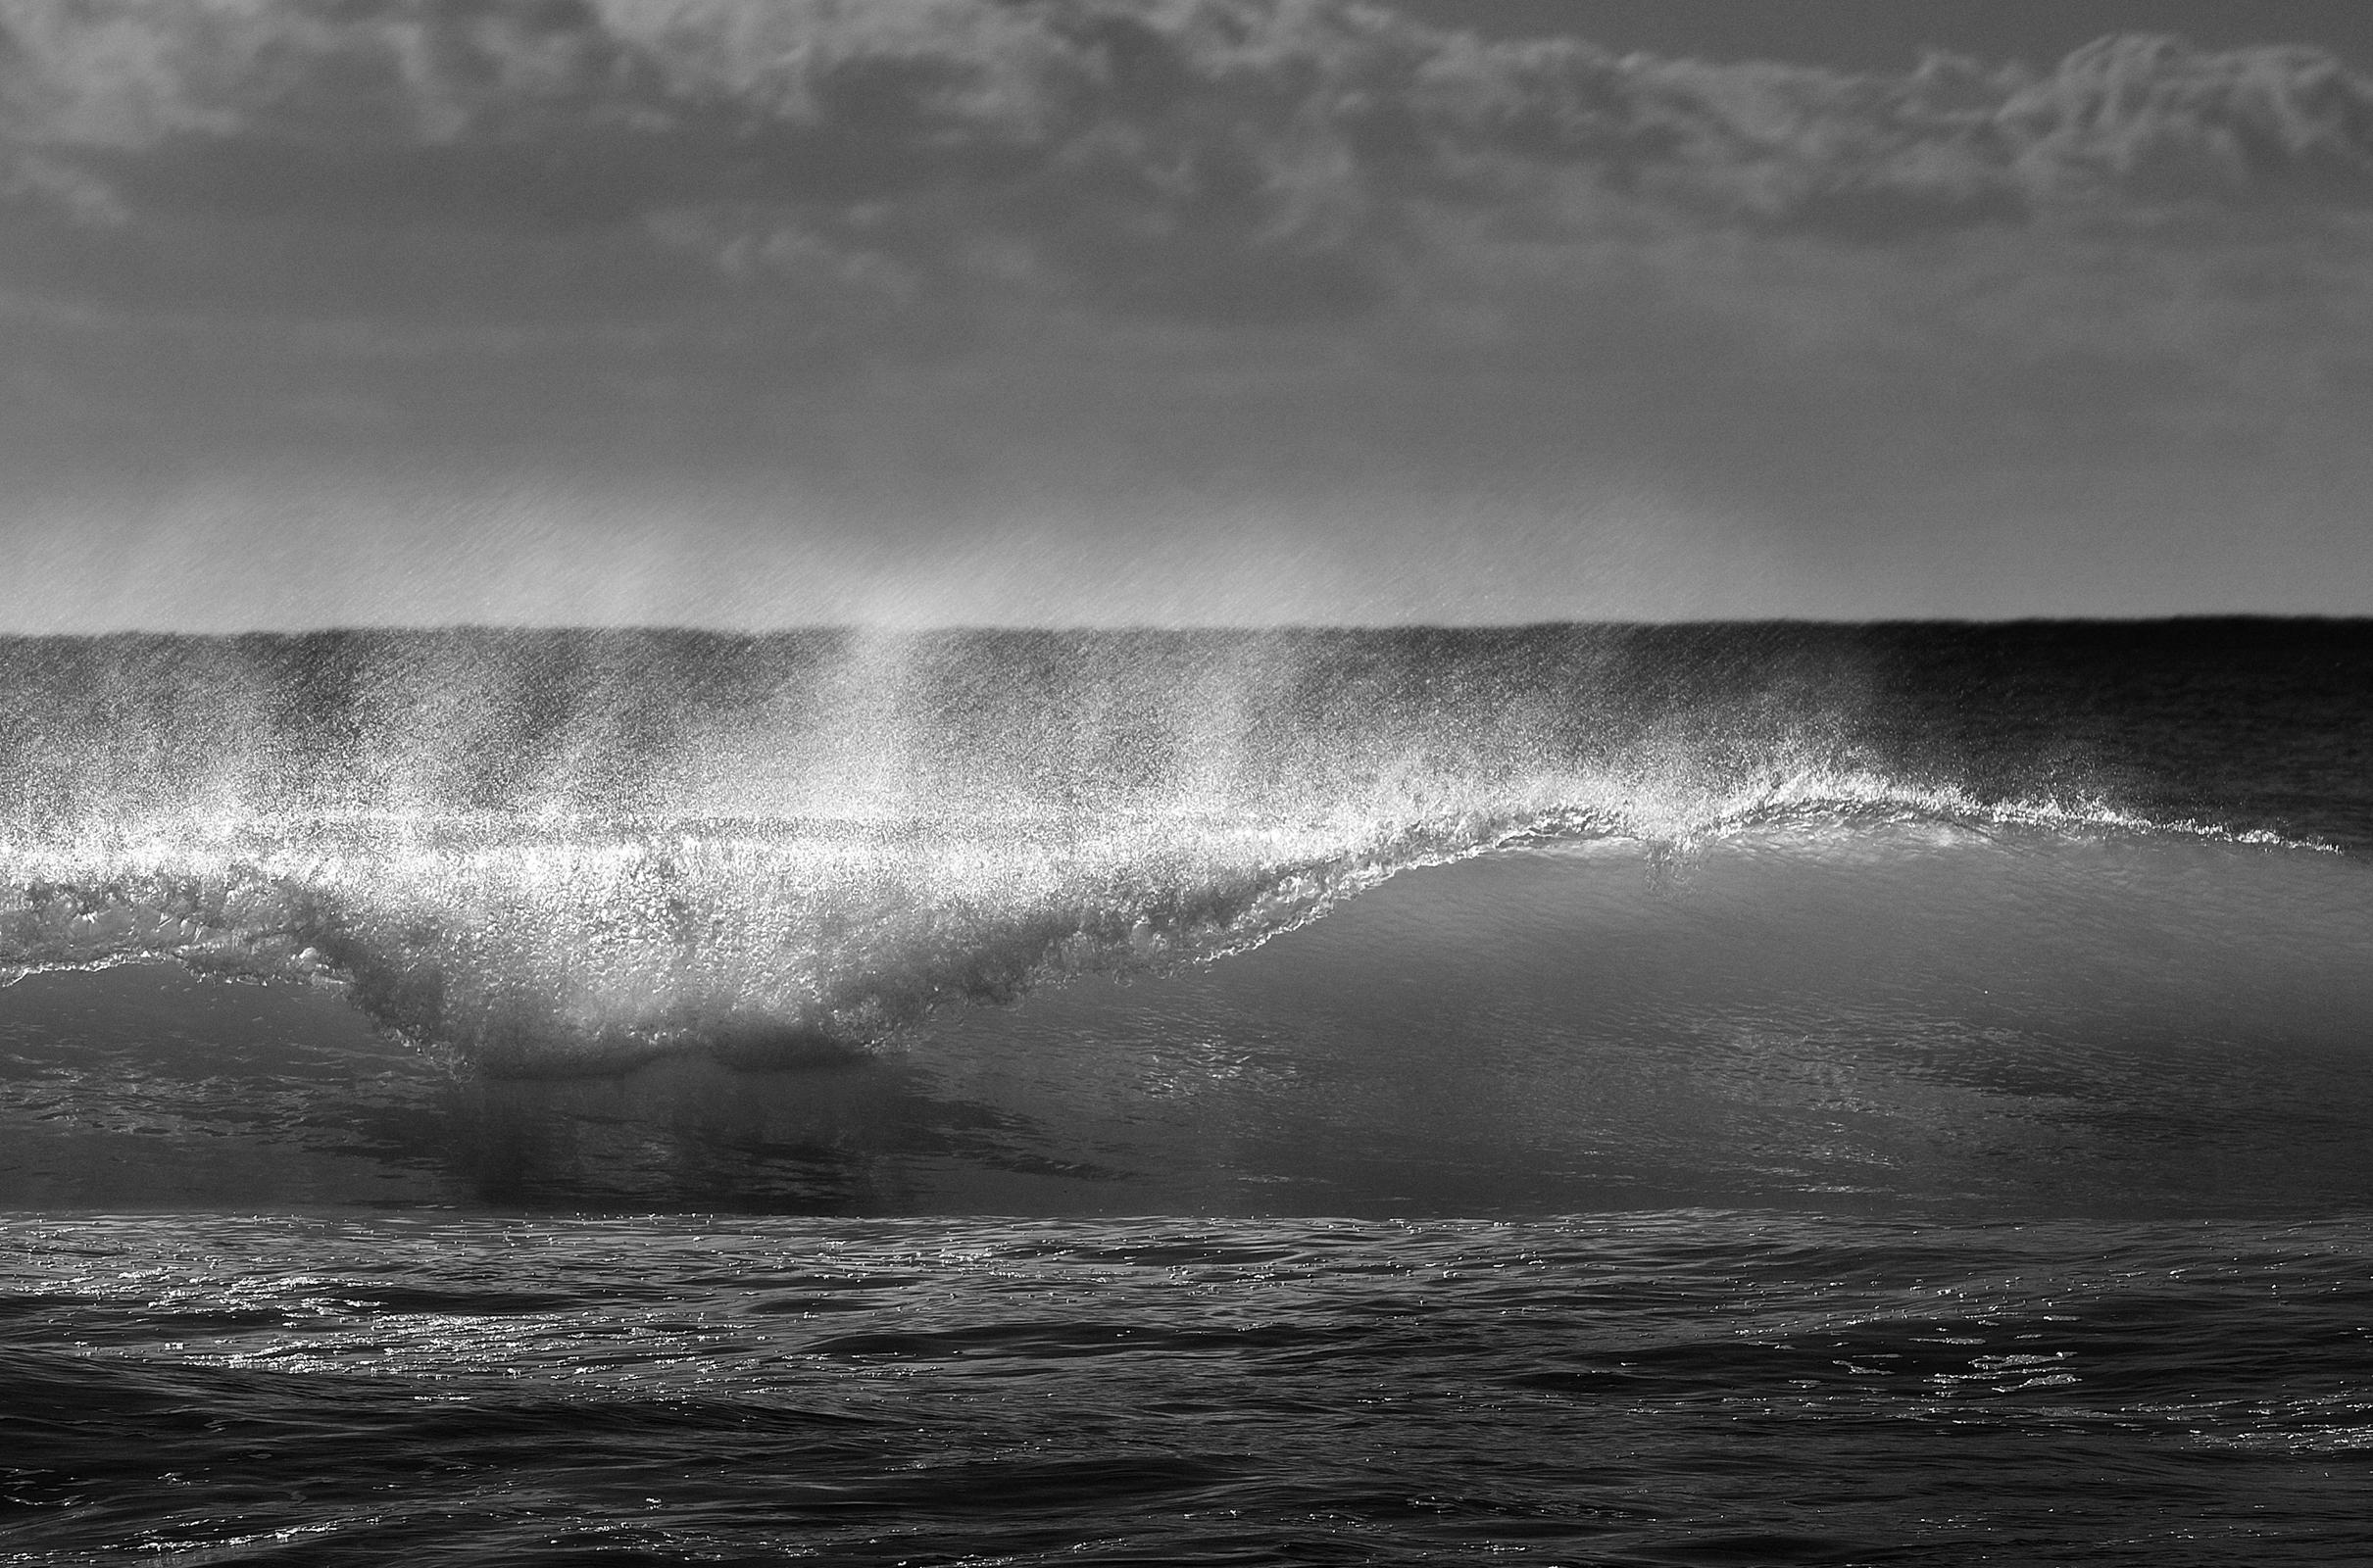 Wave 2 - Signed limited edition archival pigment print, Edition of 5
Breaking wave on the Spanish coast

This print that is being offered is a high-quality Archival Pigment print which has been printed
on fiber-based paper. 
The paper used is